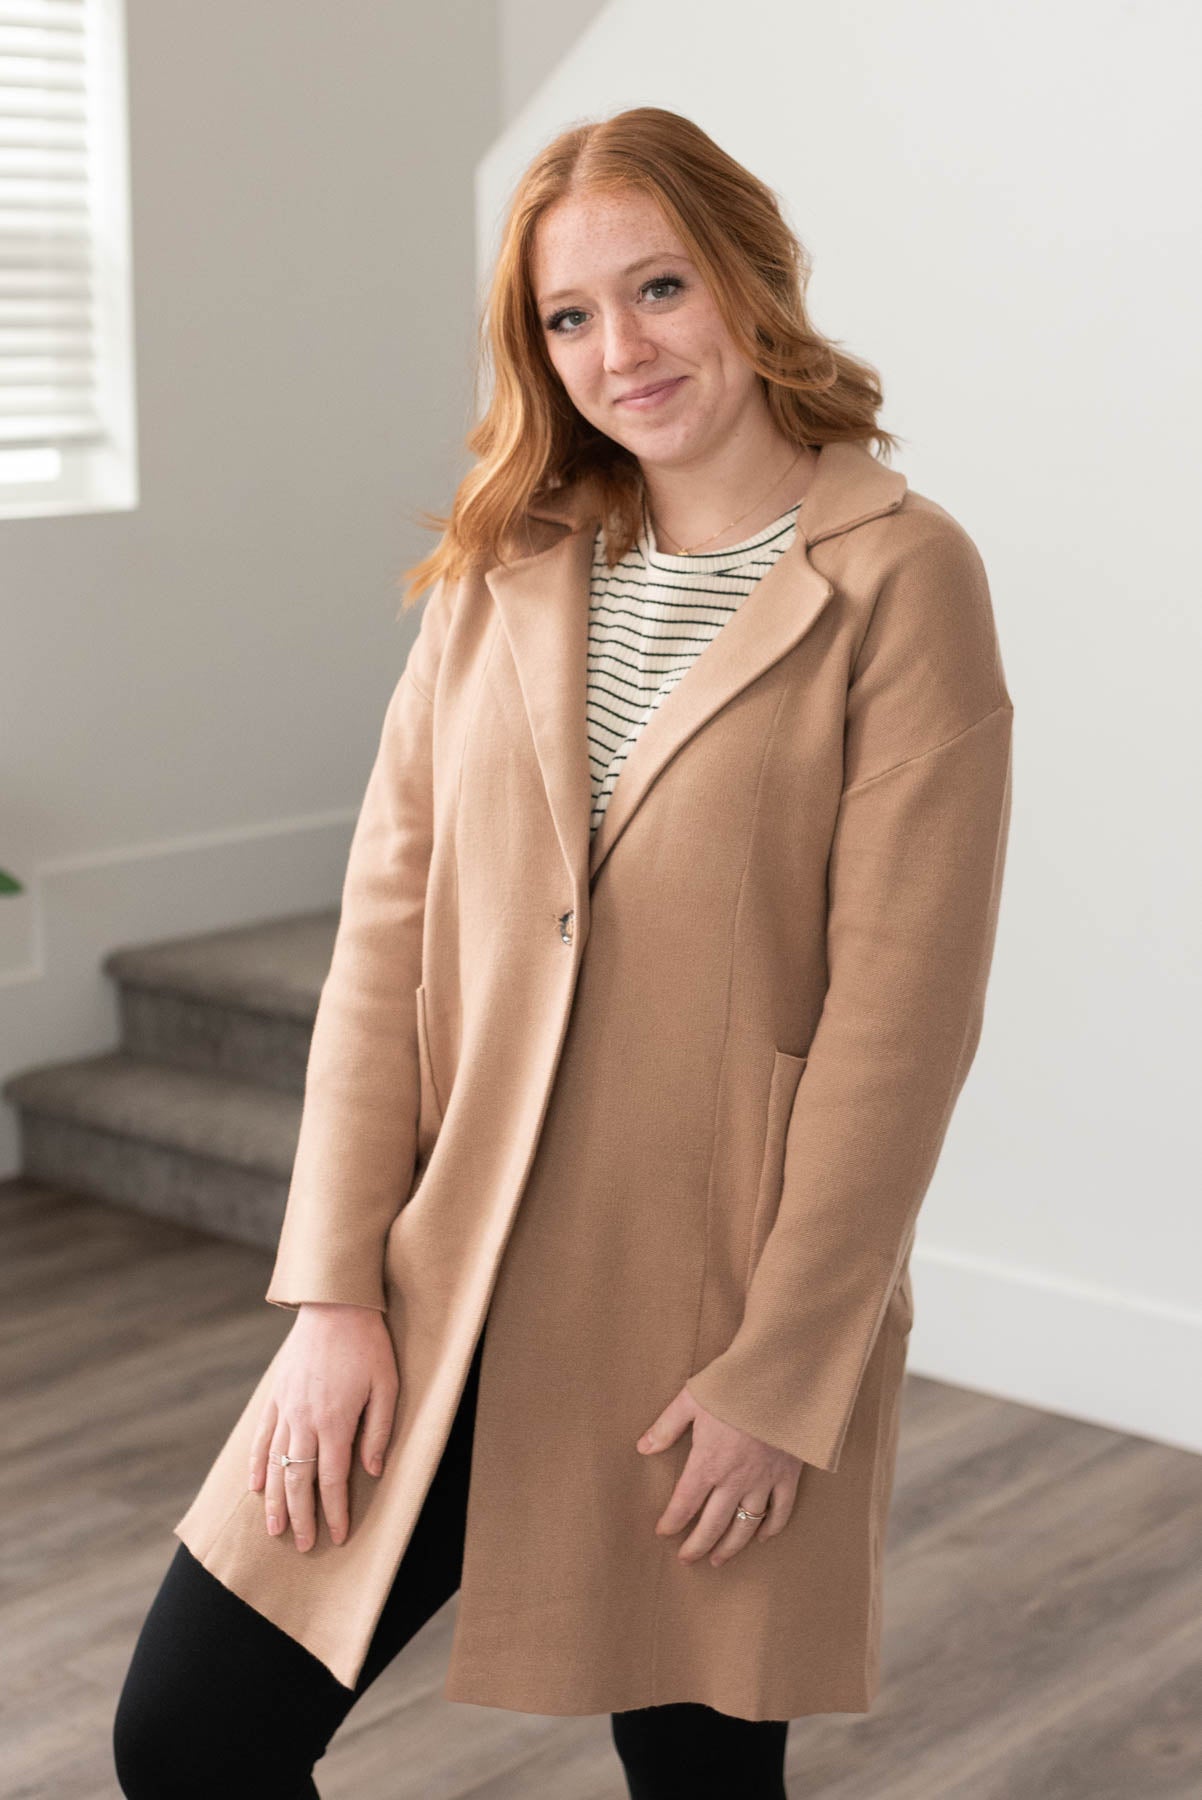 Long sleeve latte sweater coat with pockets